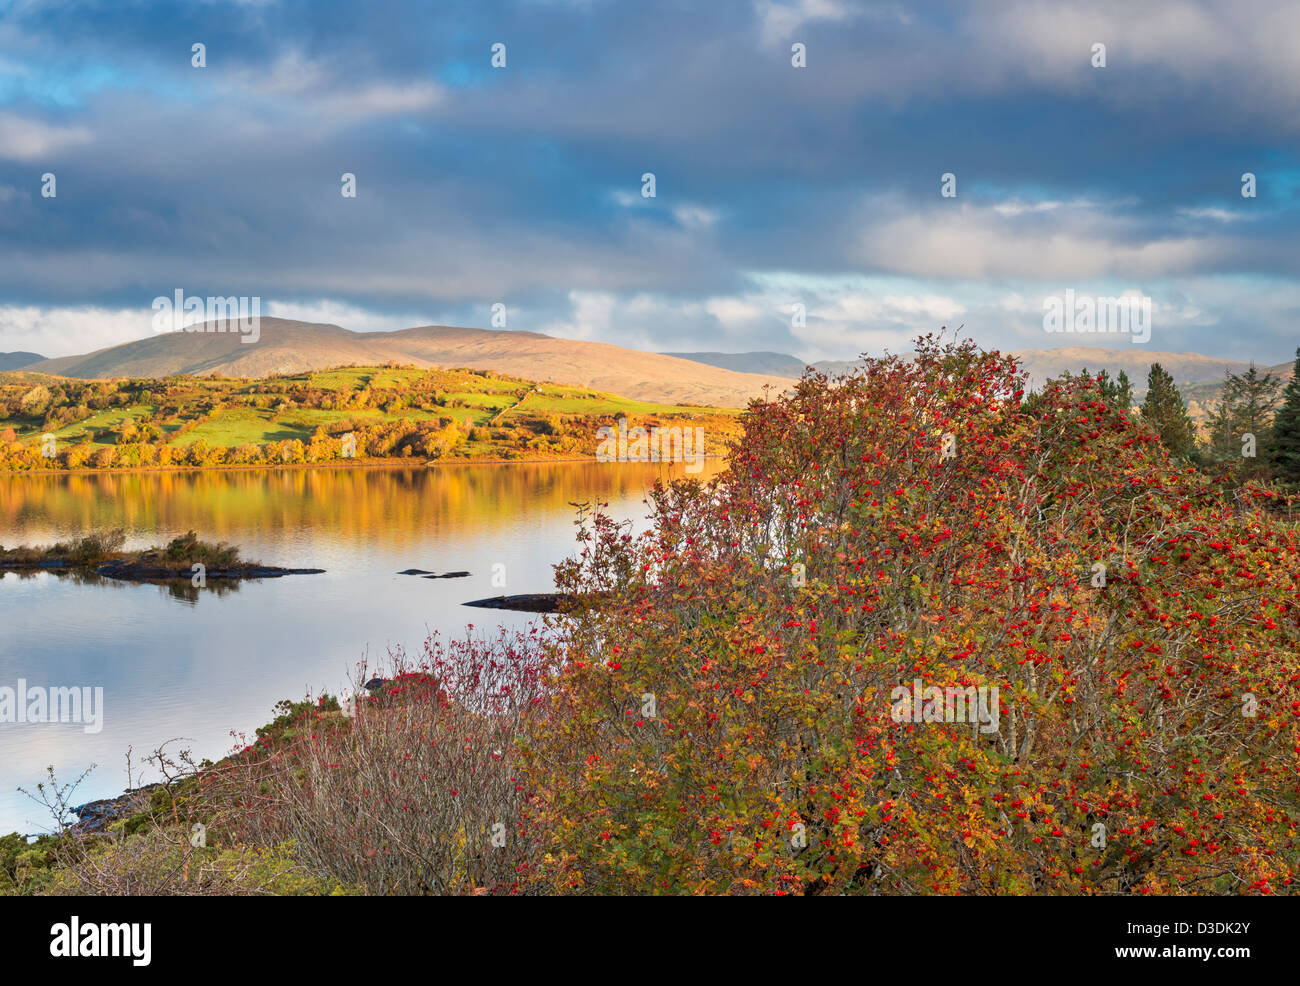 Rowan (mountain ash) berries in autumn on the shore of Lough Corrib, Galway, Ireland with a drumlin in the background Stock Photo